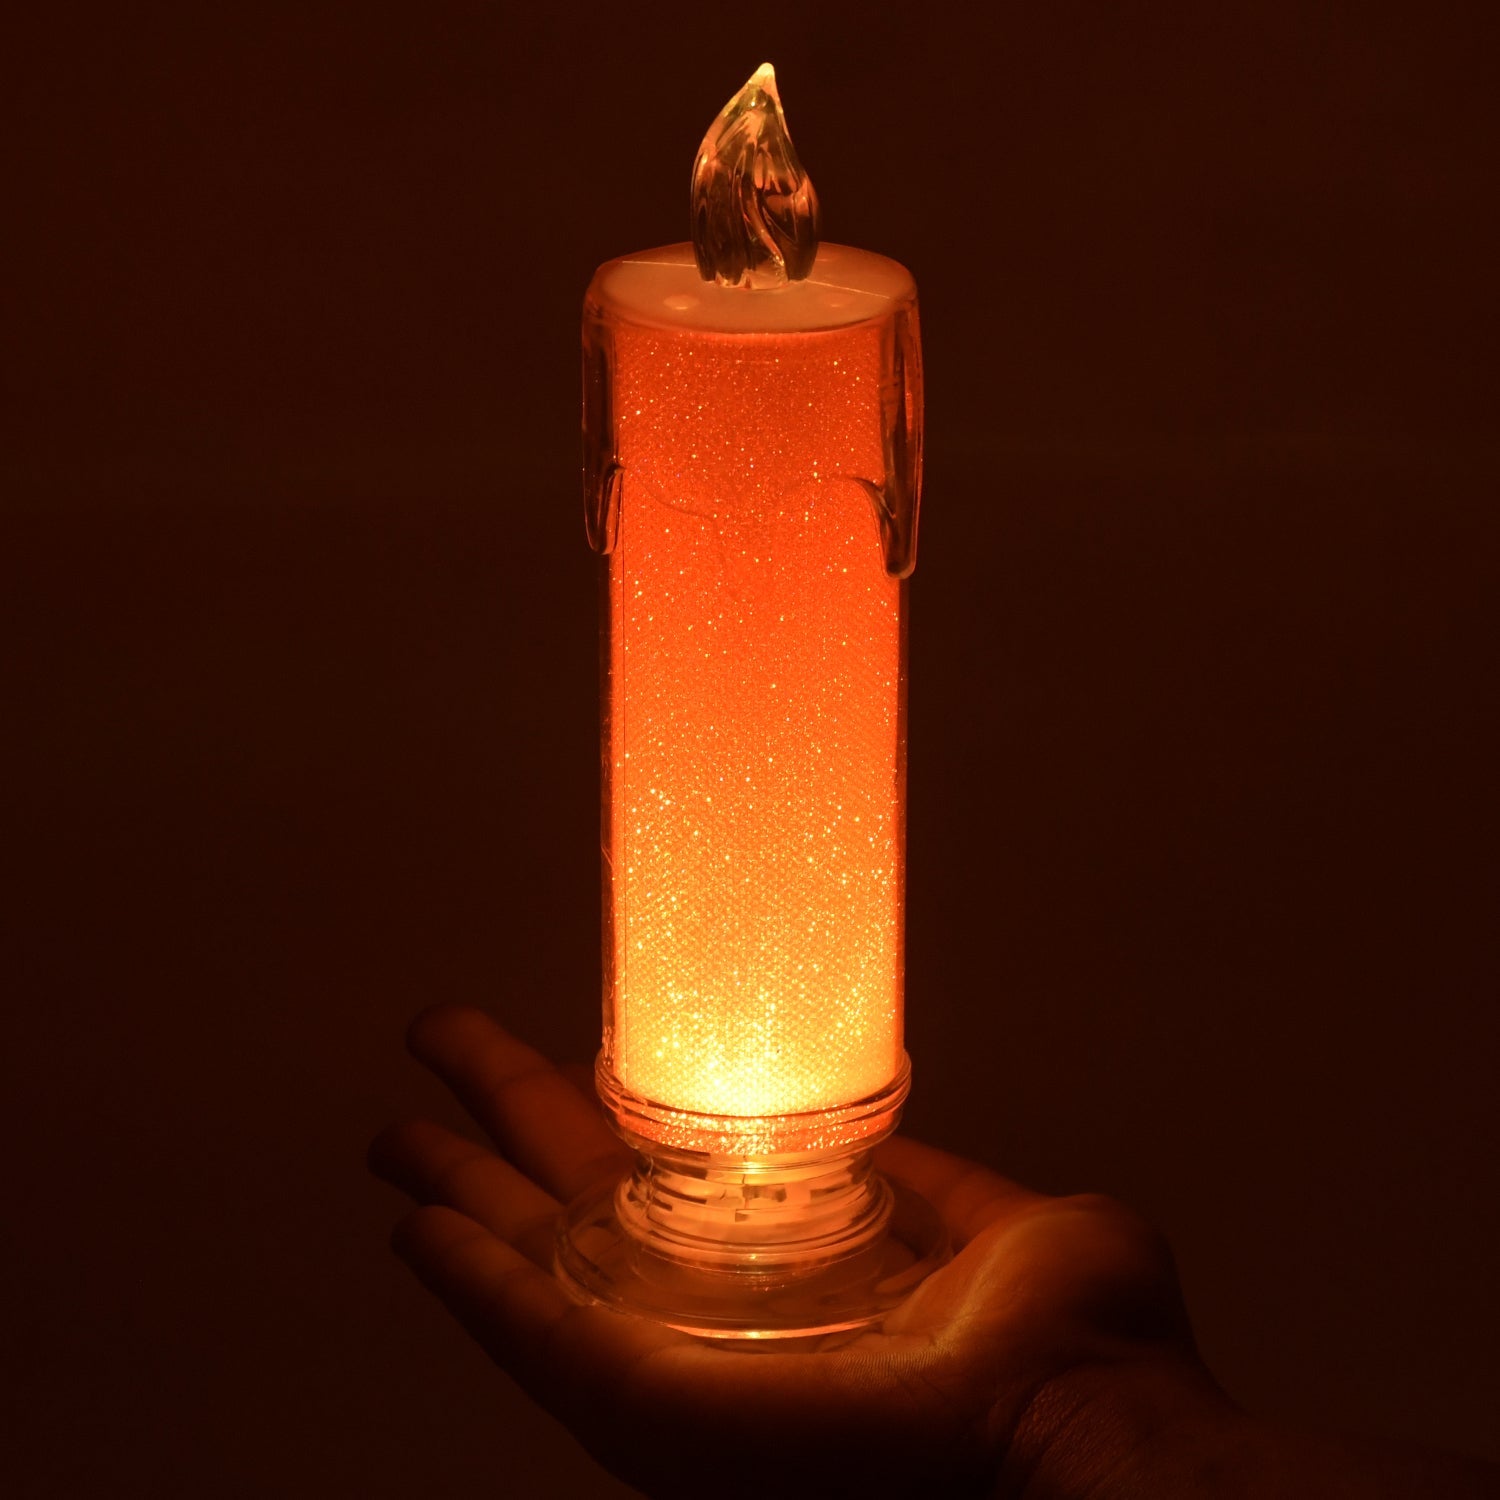 8438 Red LED Flameless Candles Battery Operated Pillar Candles Flickering Realistic Decorative Lamp Votive Transparent Flameless Ornament Tea Party Decorations for Hotel, Scene,Home Decor, Restaurant, Diwali Decoration Candle Crystal Lamp (1 Pc)